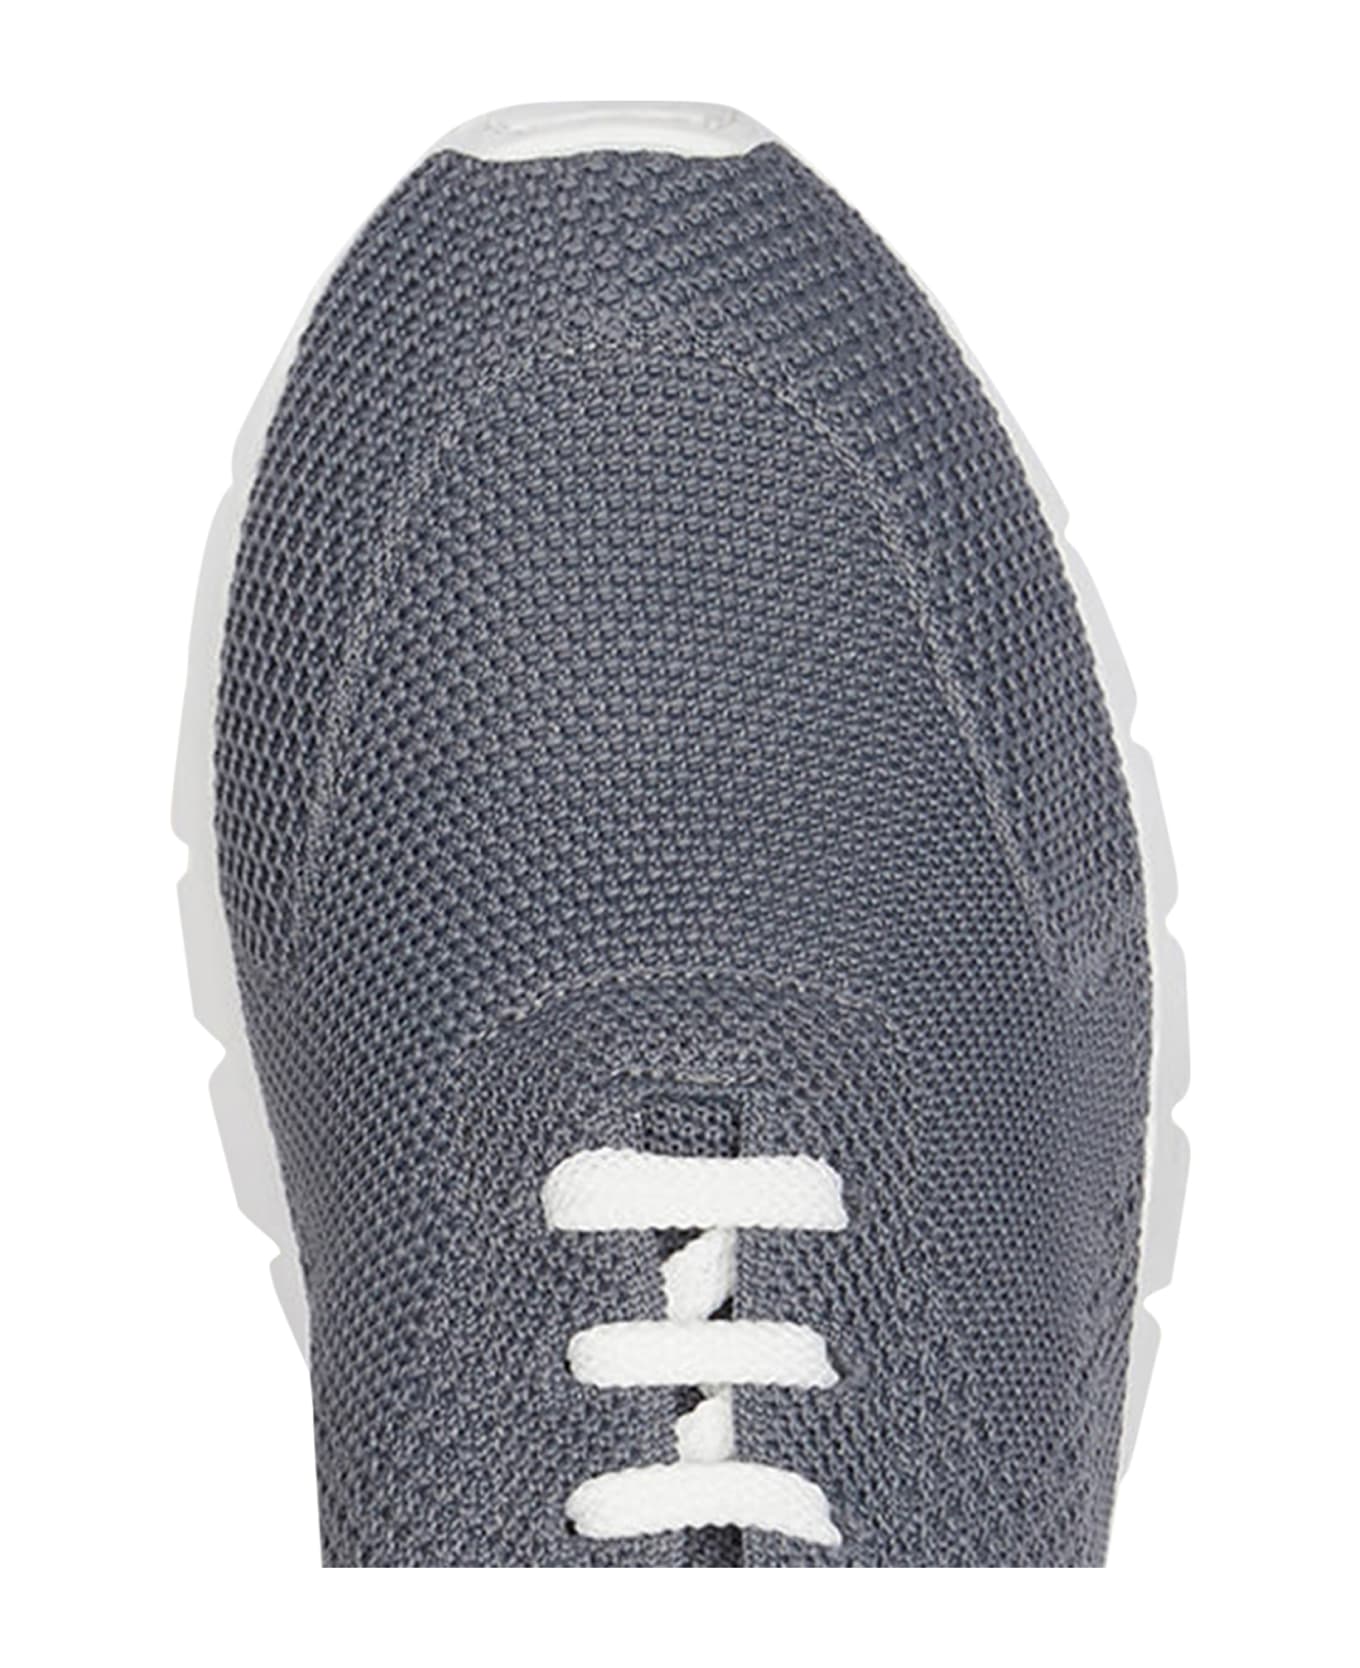 Kiton Fits - Sneakers Shoes Cotton - GREY スニーカー